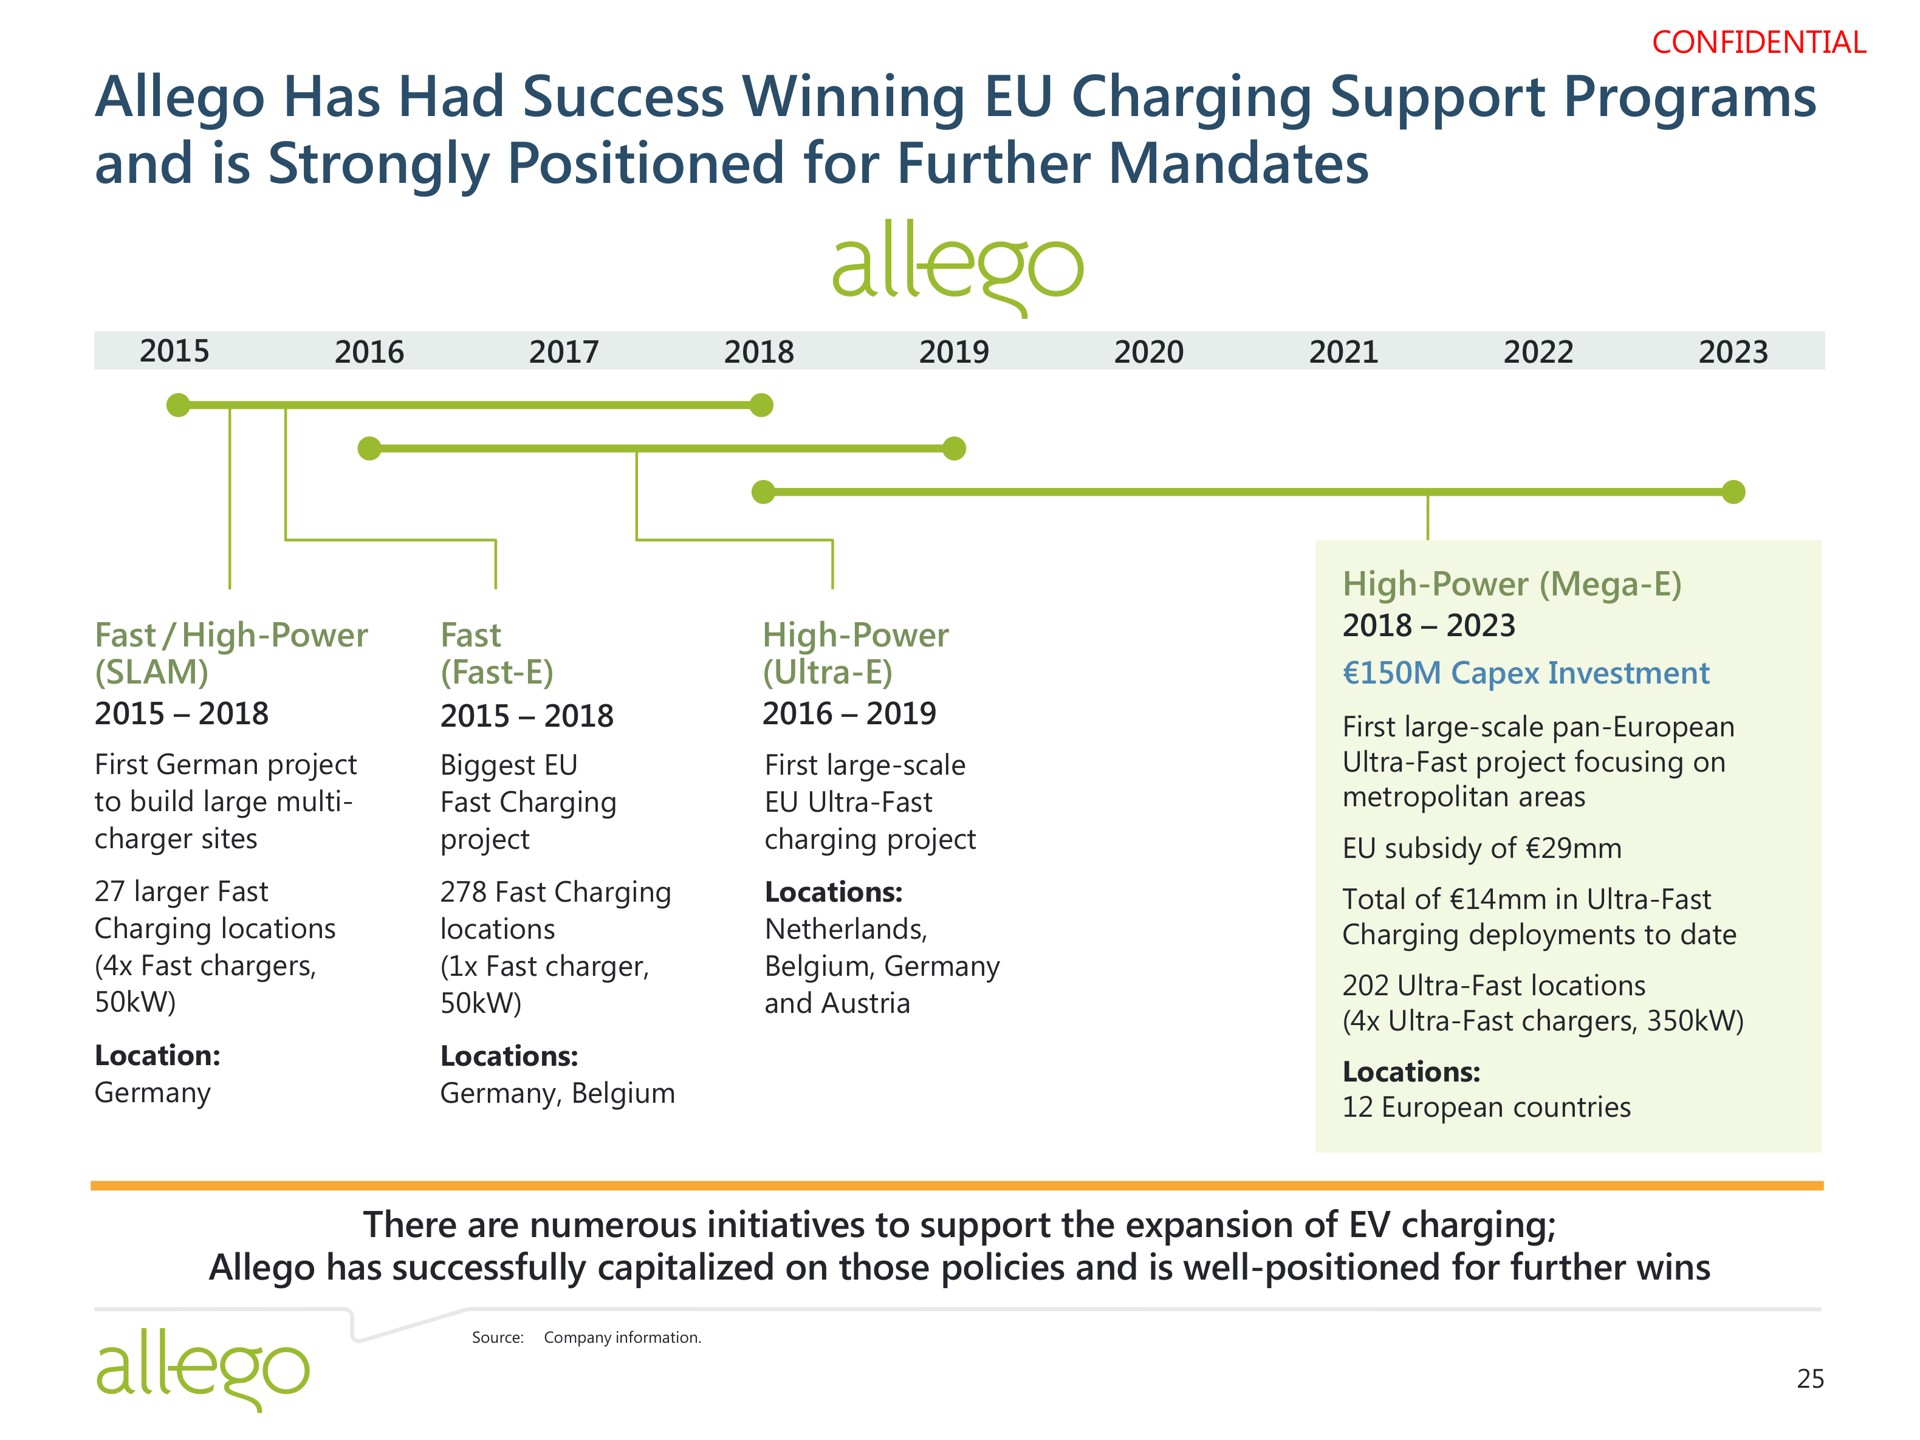 has had success winning charging support programs and is strongly positioned for further mandates | Allego